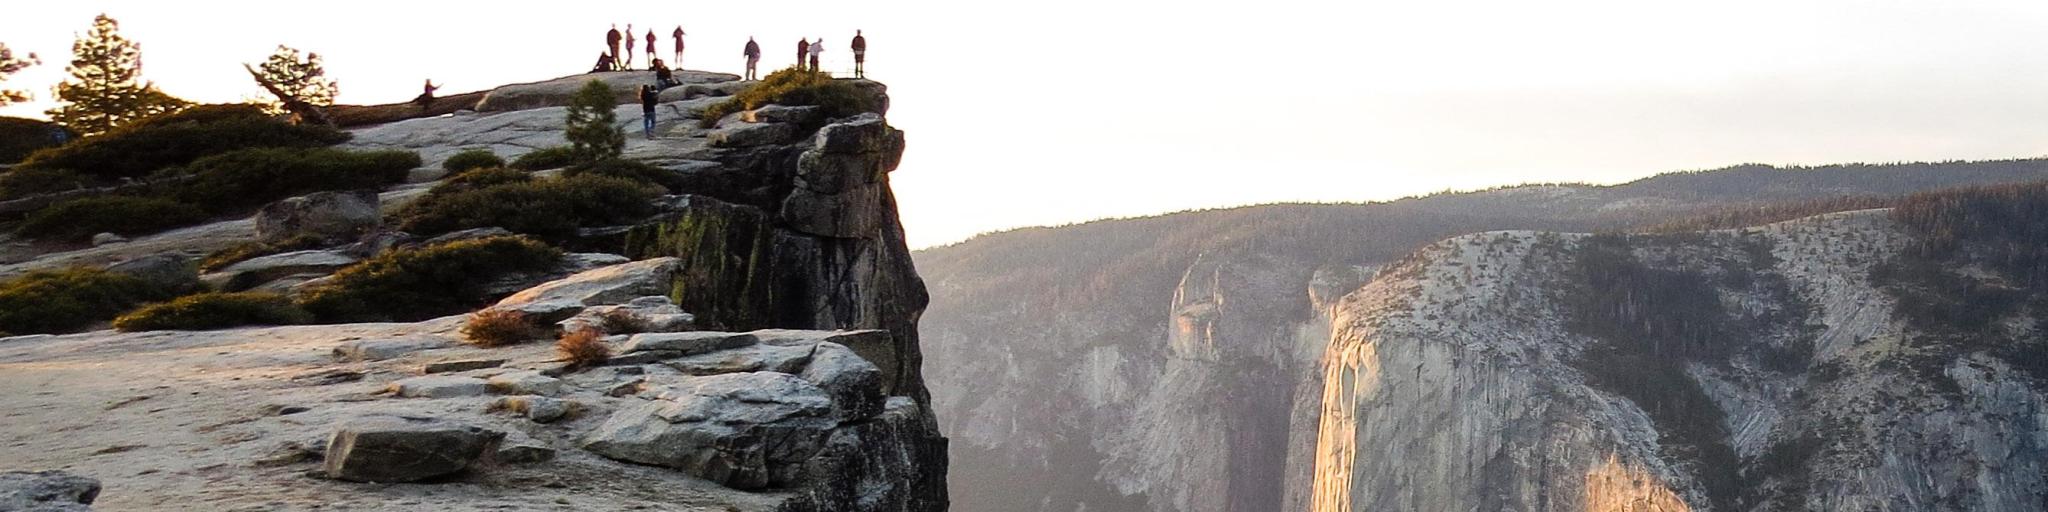 Distance view of hikers at the summit Taft Point at Yosemite National Park